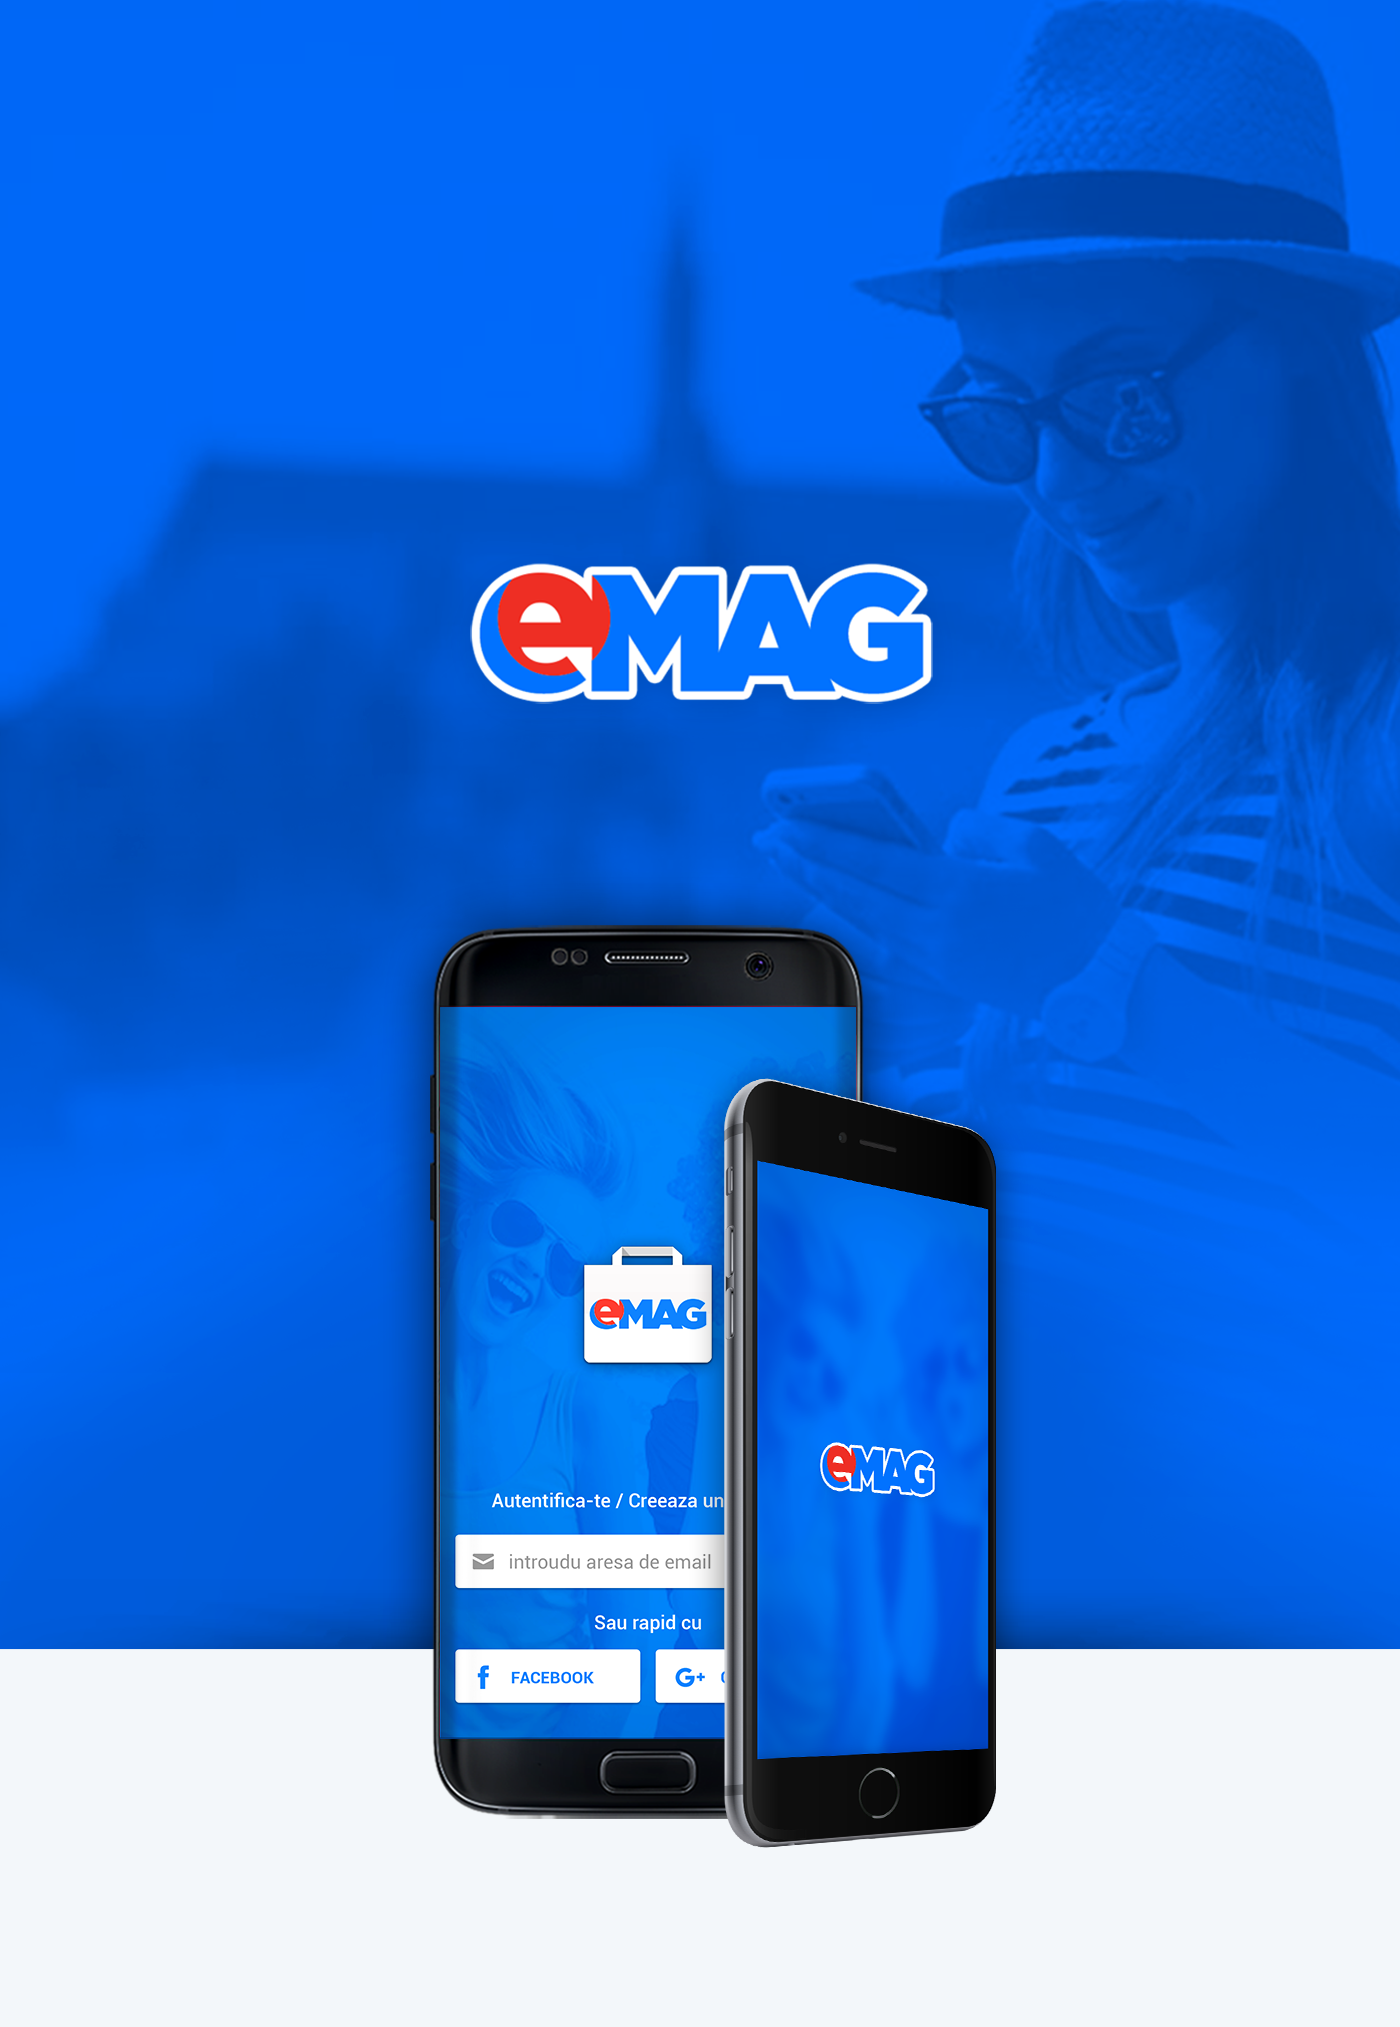 Supersonic speed meet Separately eMAG - Mobile app | Behance